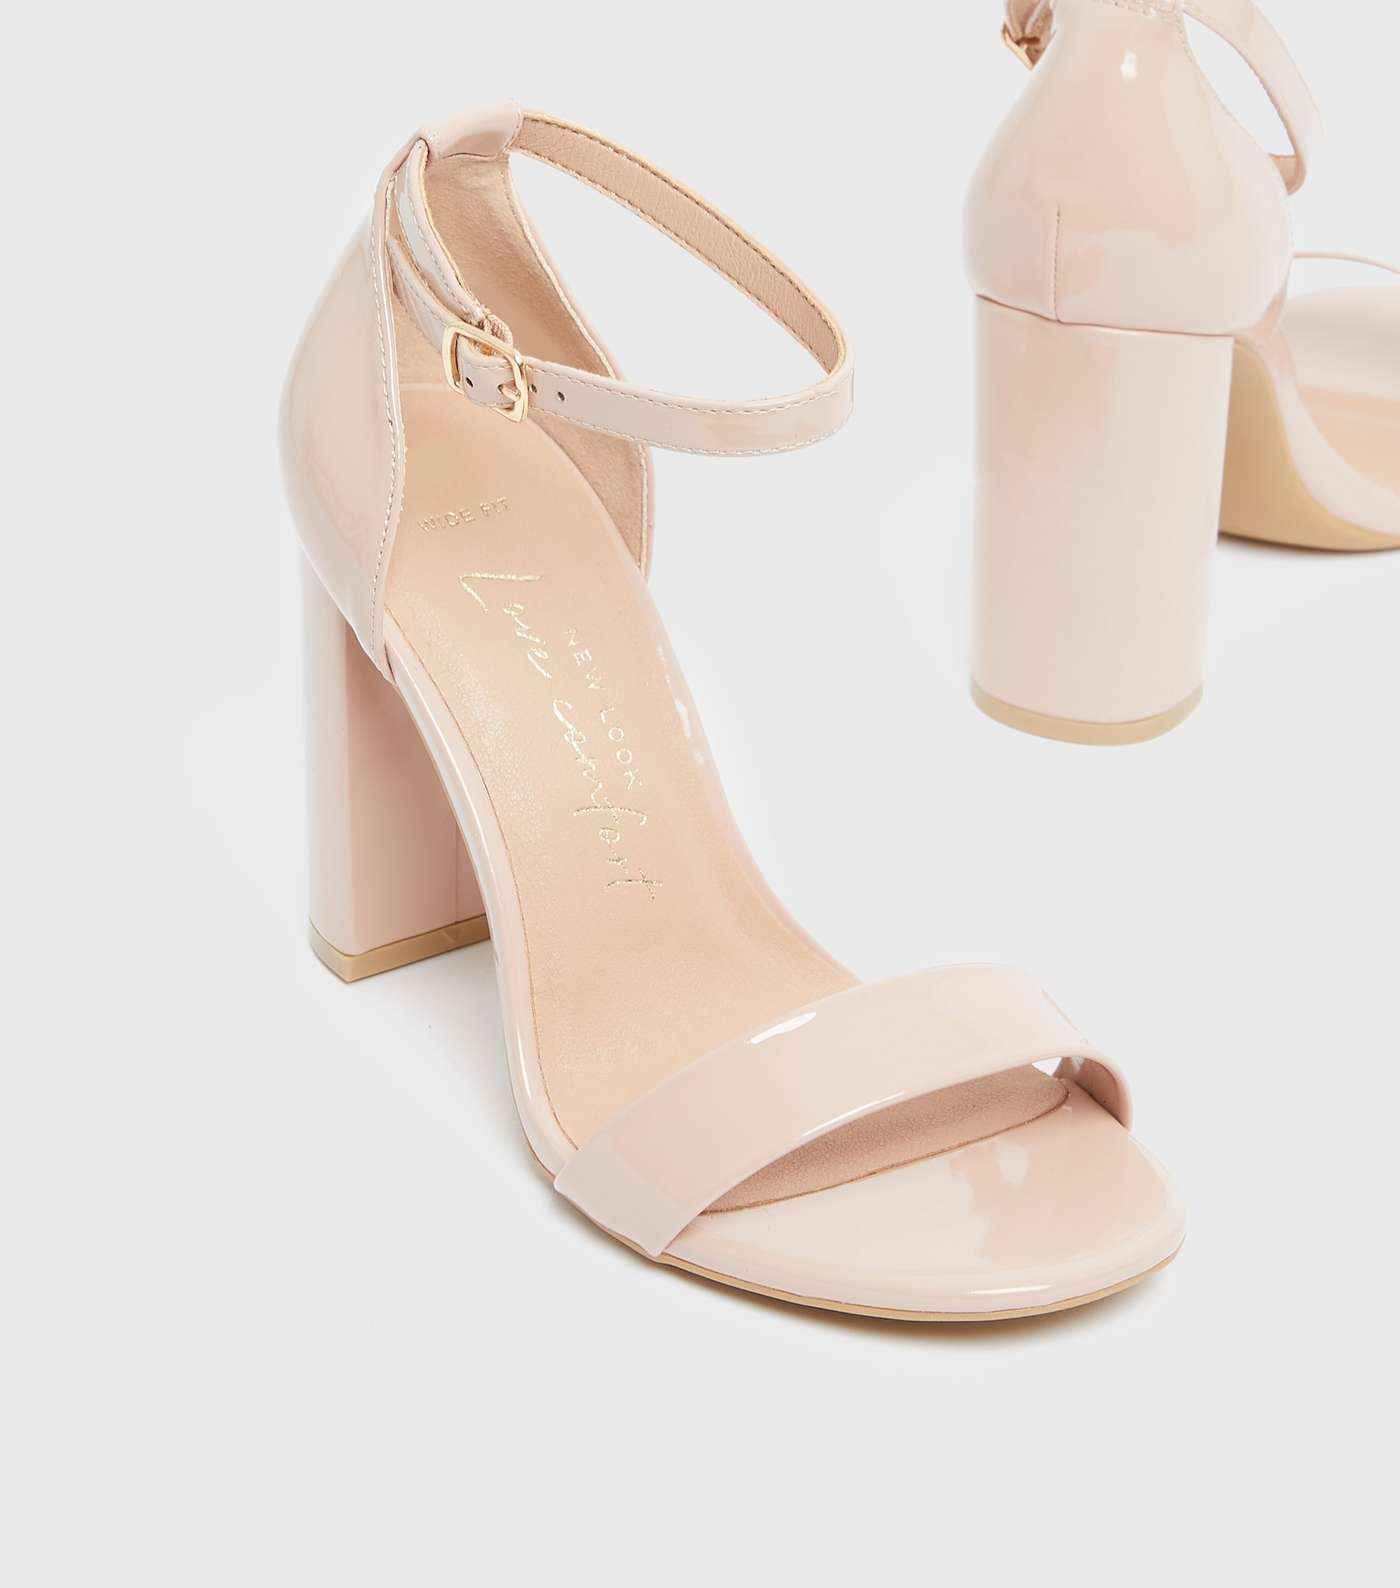 Wide Fit Pale Pink Patent Strappy Block Heel Sandals Image 3